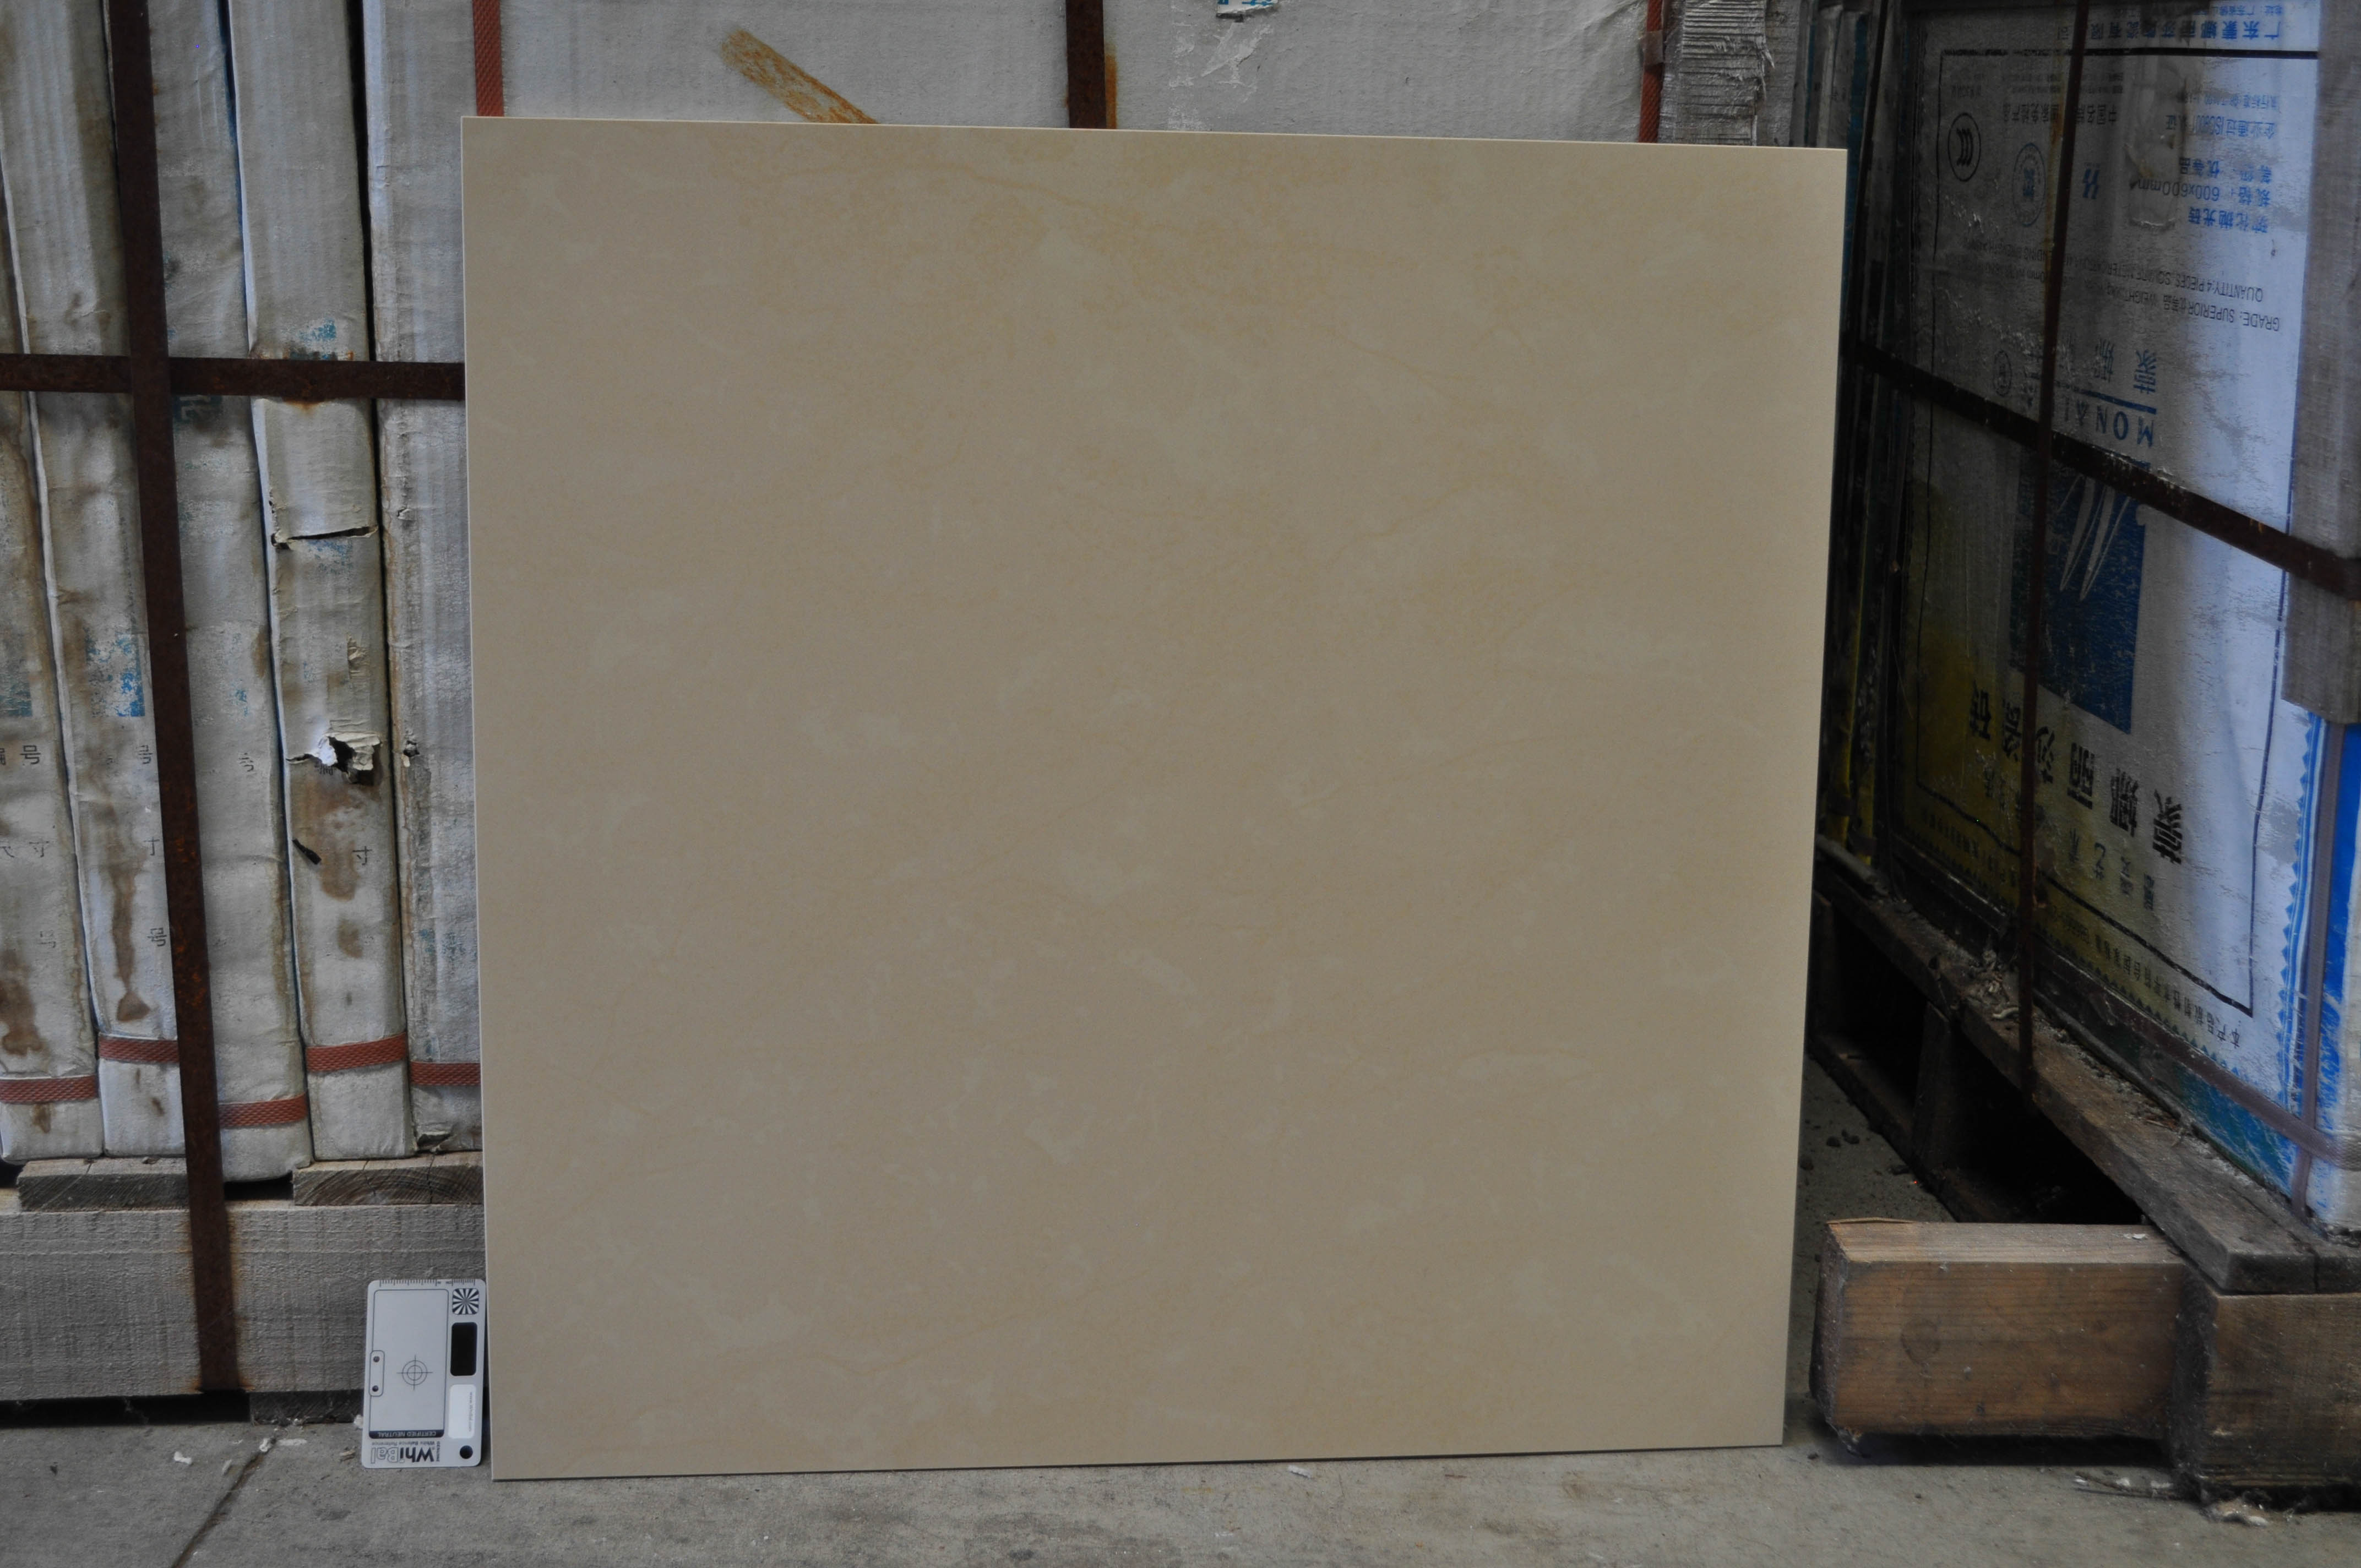 a sales sample of a 60cm x 60cm porcelain tile available for purchase from Concord Floors